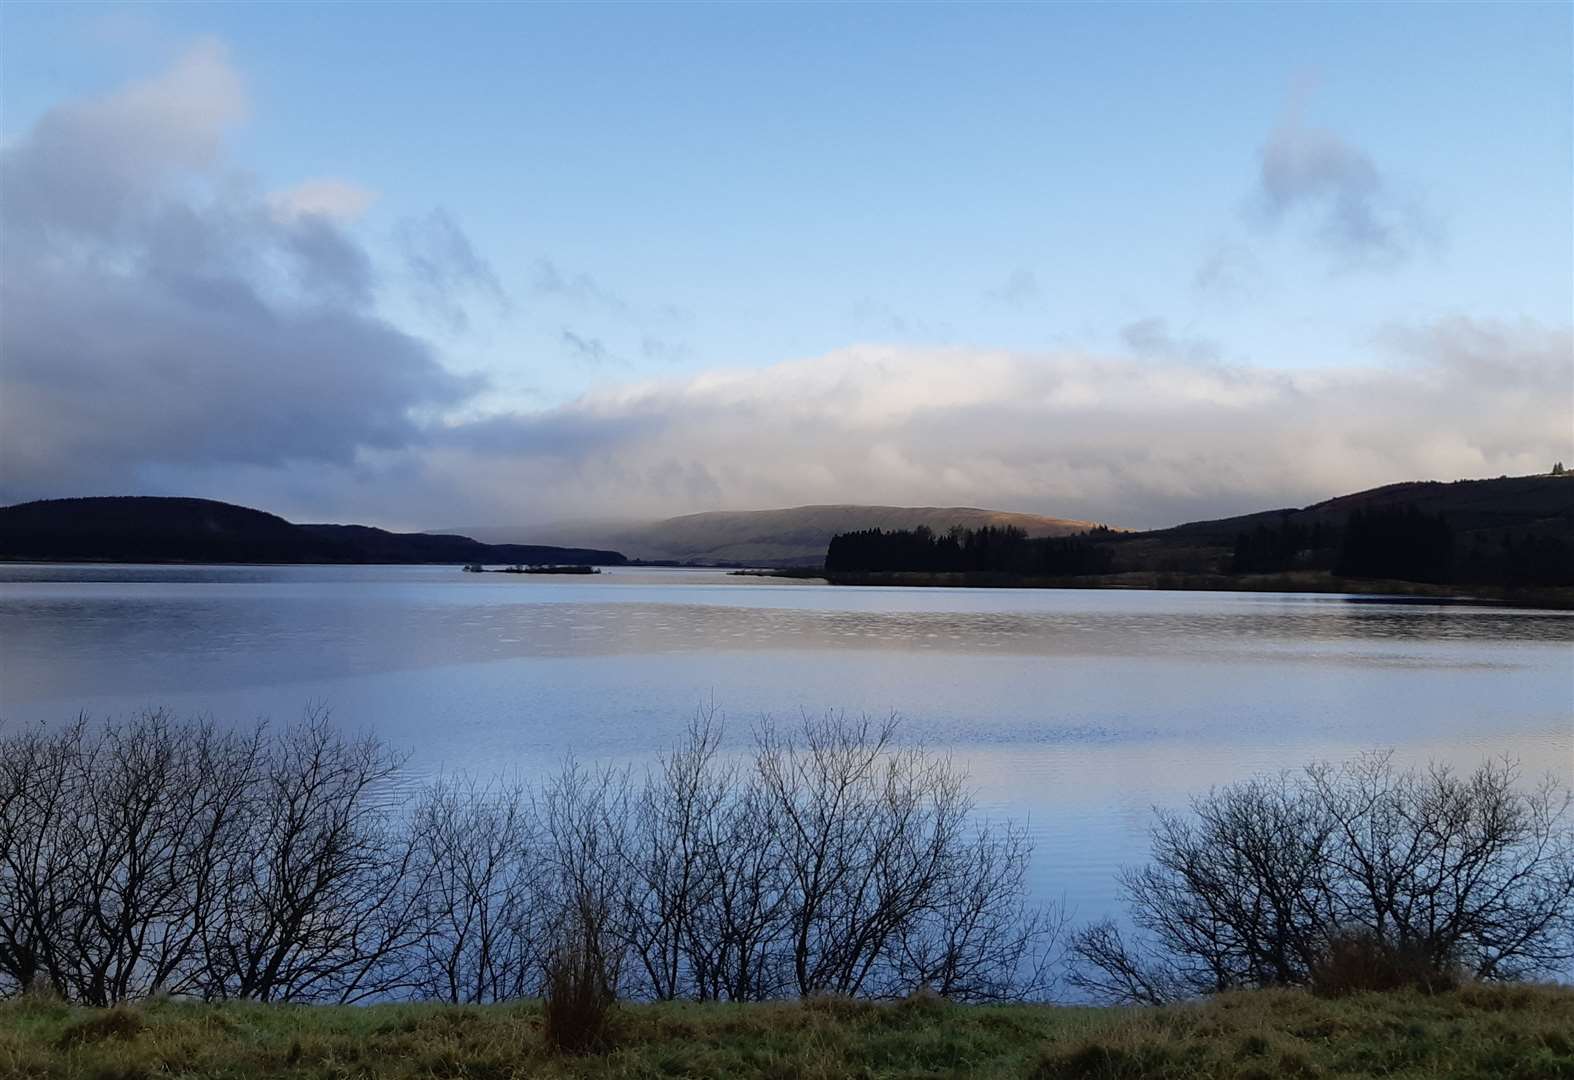 Warnings on loch and river usage have been followed by advice to cut water usage after increased consumption